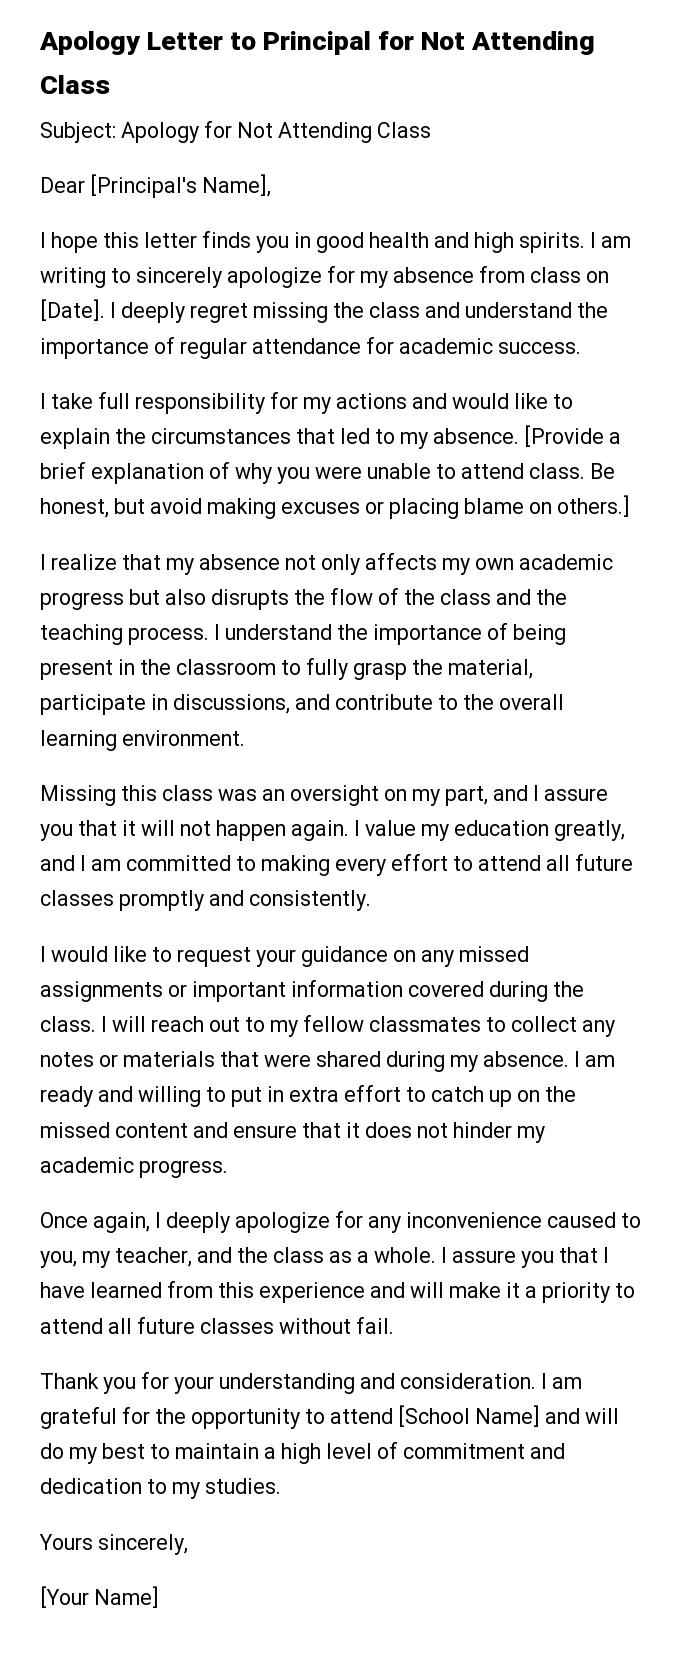 Apology Letter to Principal for Not Attending Class